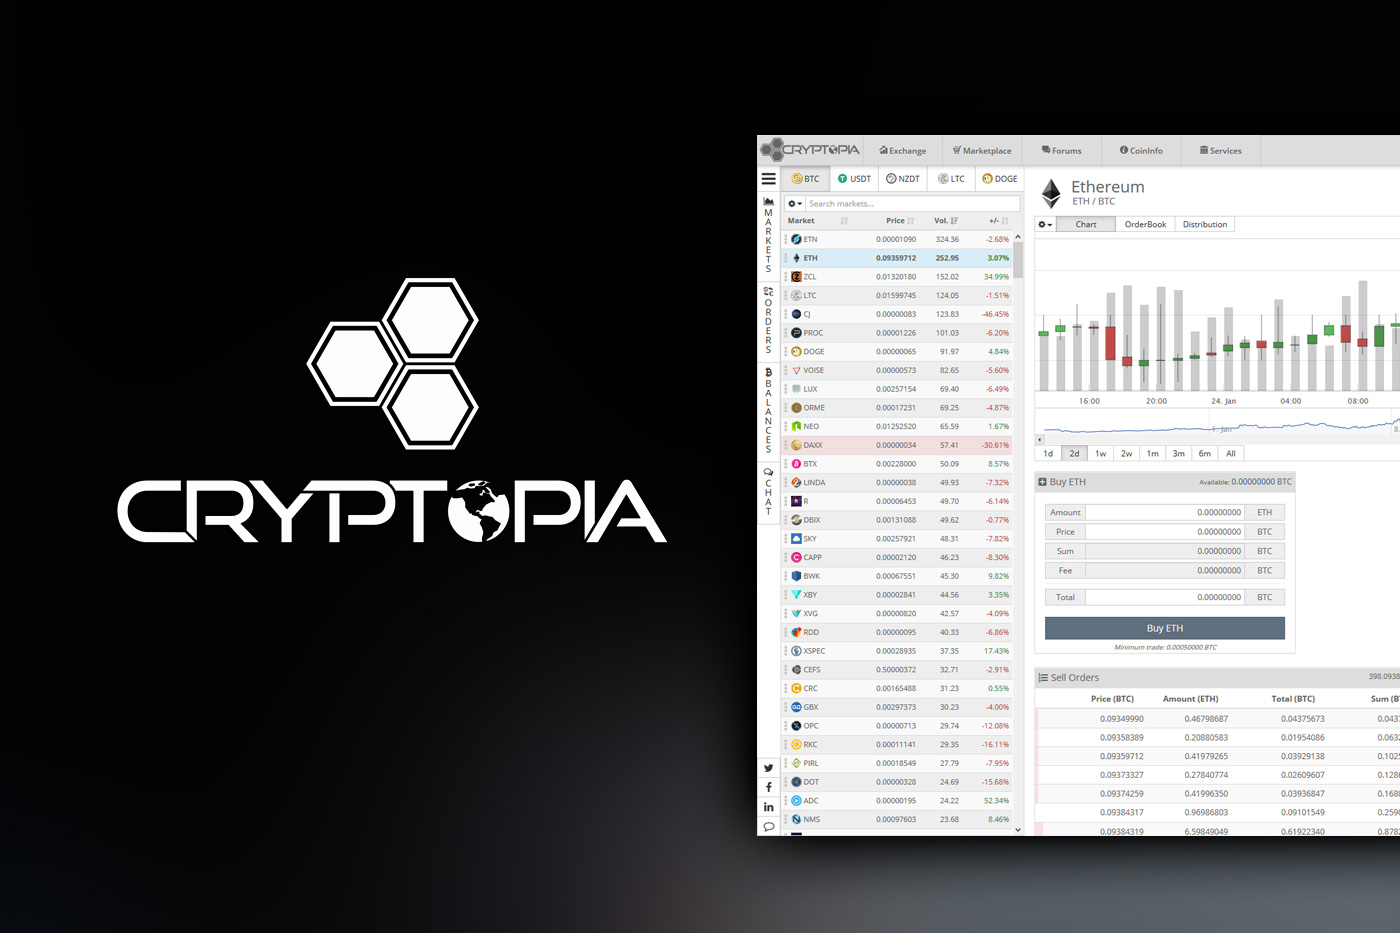 Cryptopia Exchange Resumes Crypto Trading Amid Banking Issues - CoinDesk